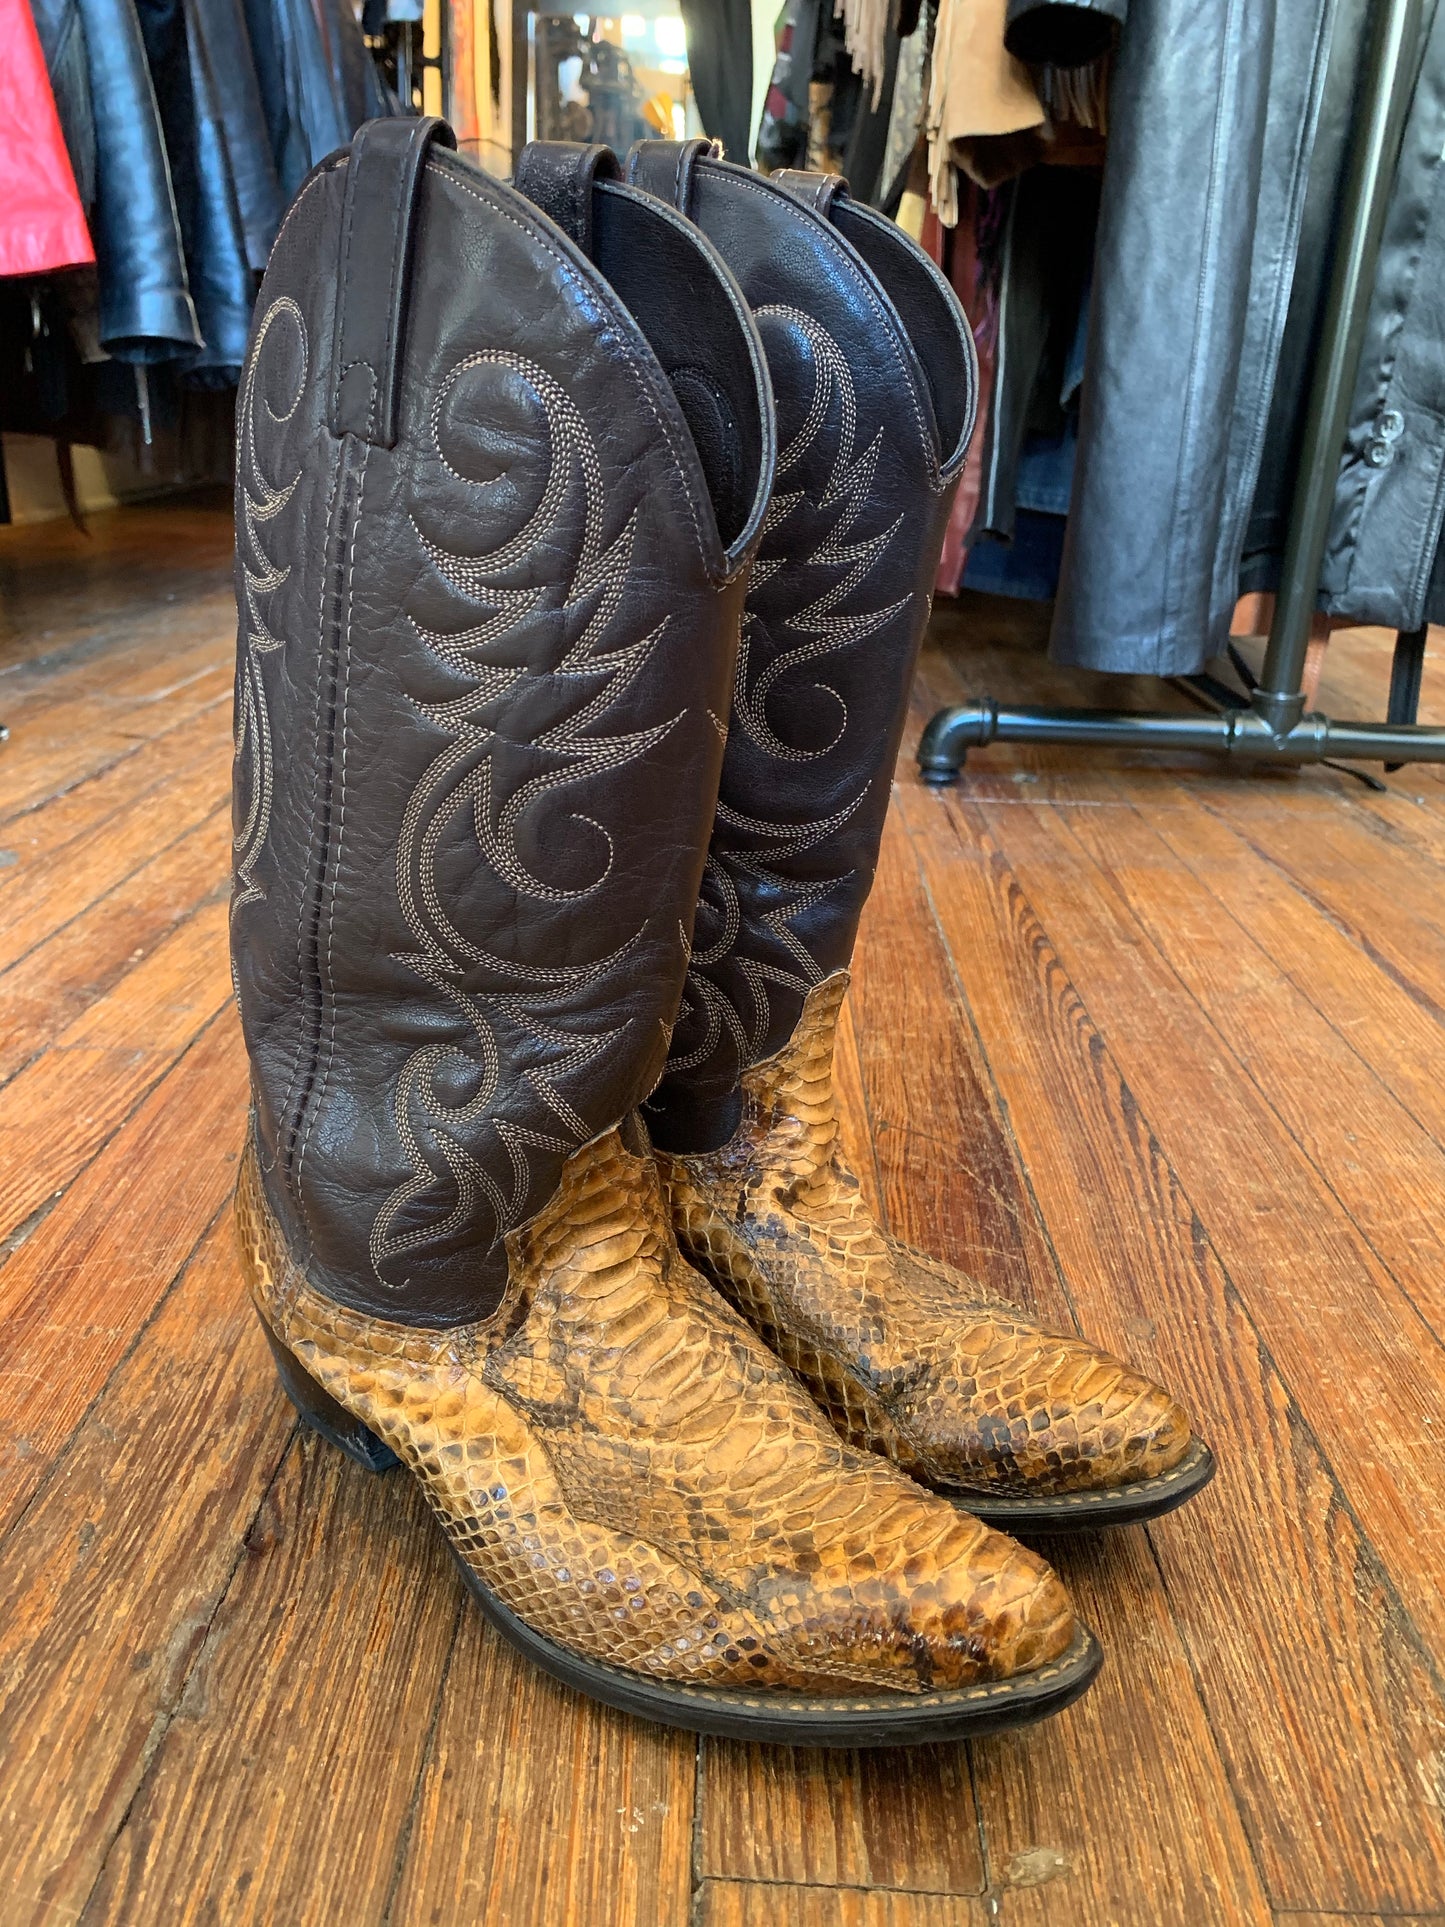 Vintage Acme Brown and Tan Snakeskin Cowboy Boots